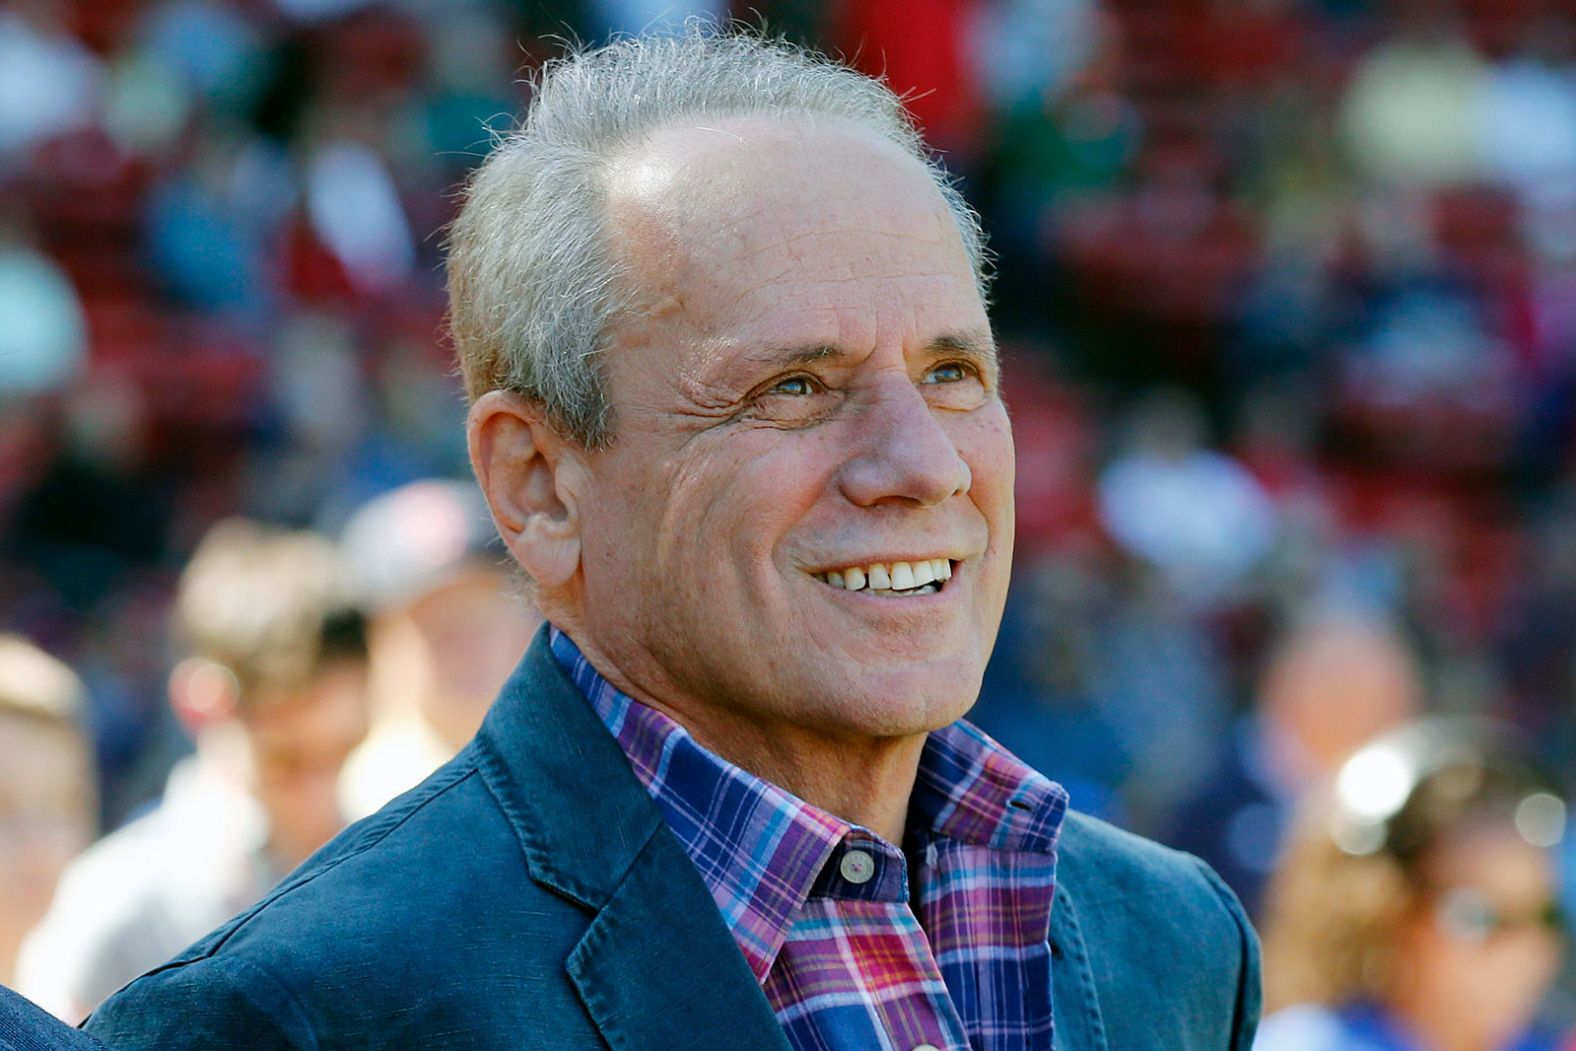 <a href="index.php?page=&url=https%3A%2F%2Fcms.cnn.com%2F2024%2F04%2F02%2Fsport%2Fboston-red-sox-executive-larry-lucchino-dies-spt-intl%3Fbrand-site%3Dcnn%26language%3Den%26agent%3Dany%26region%3Dany" target="_blank">Larry Lucchino</a>, whose Boston Red Sox teams won three World Series while he was president and CEO, died on April 2, according to his family. He was 78.